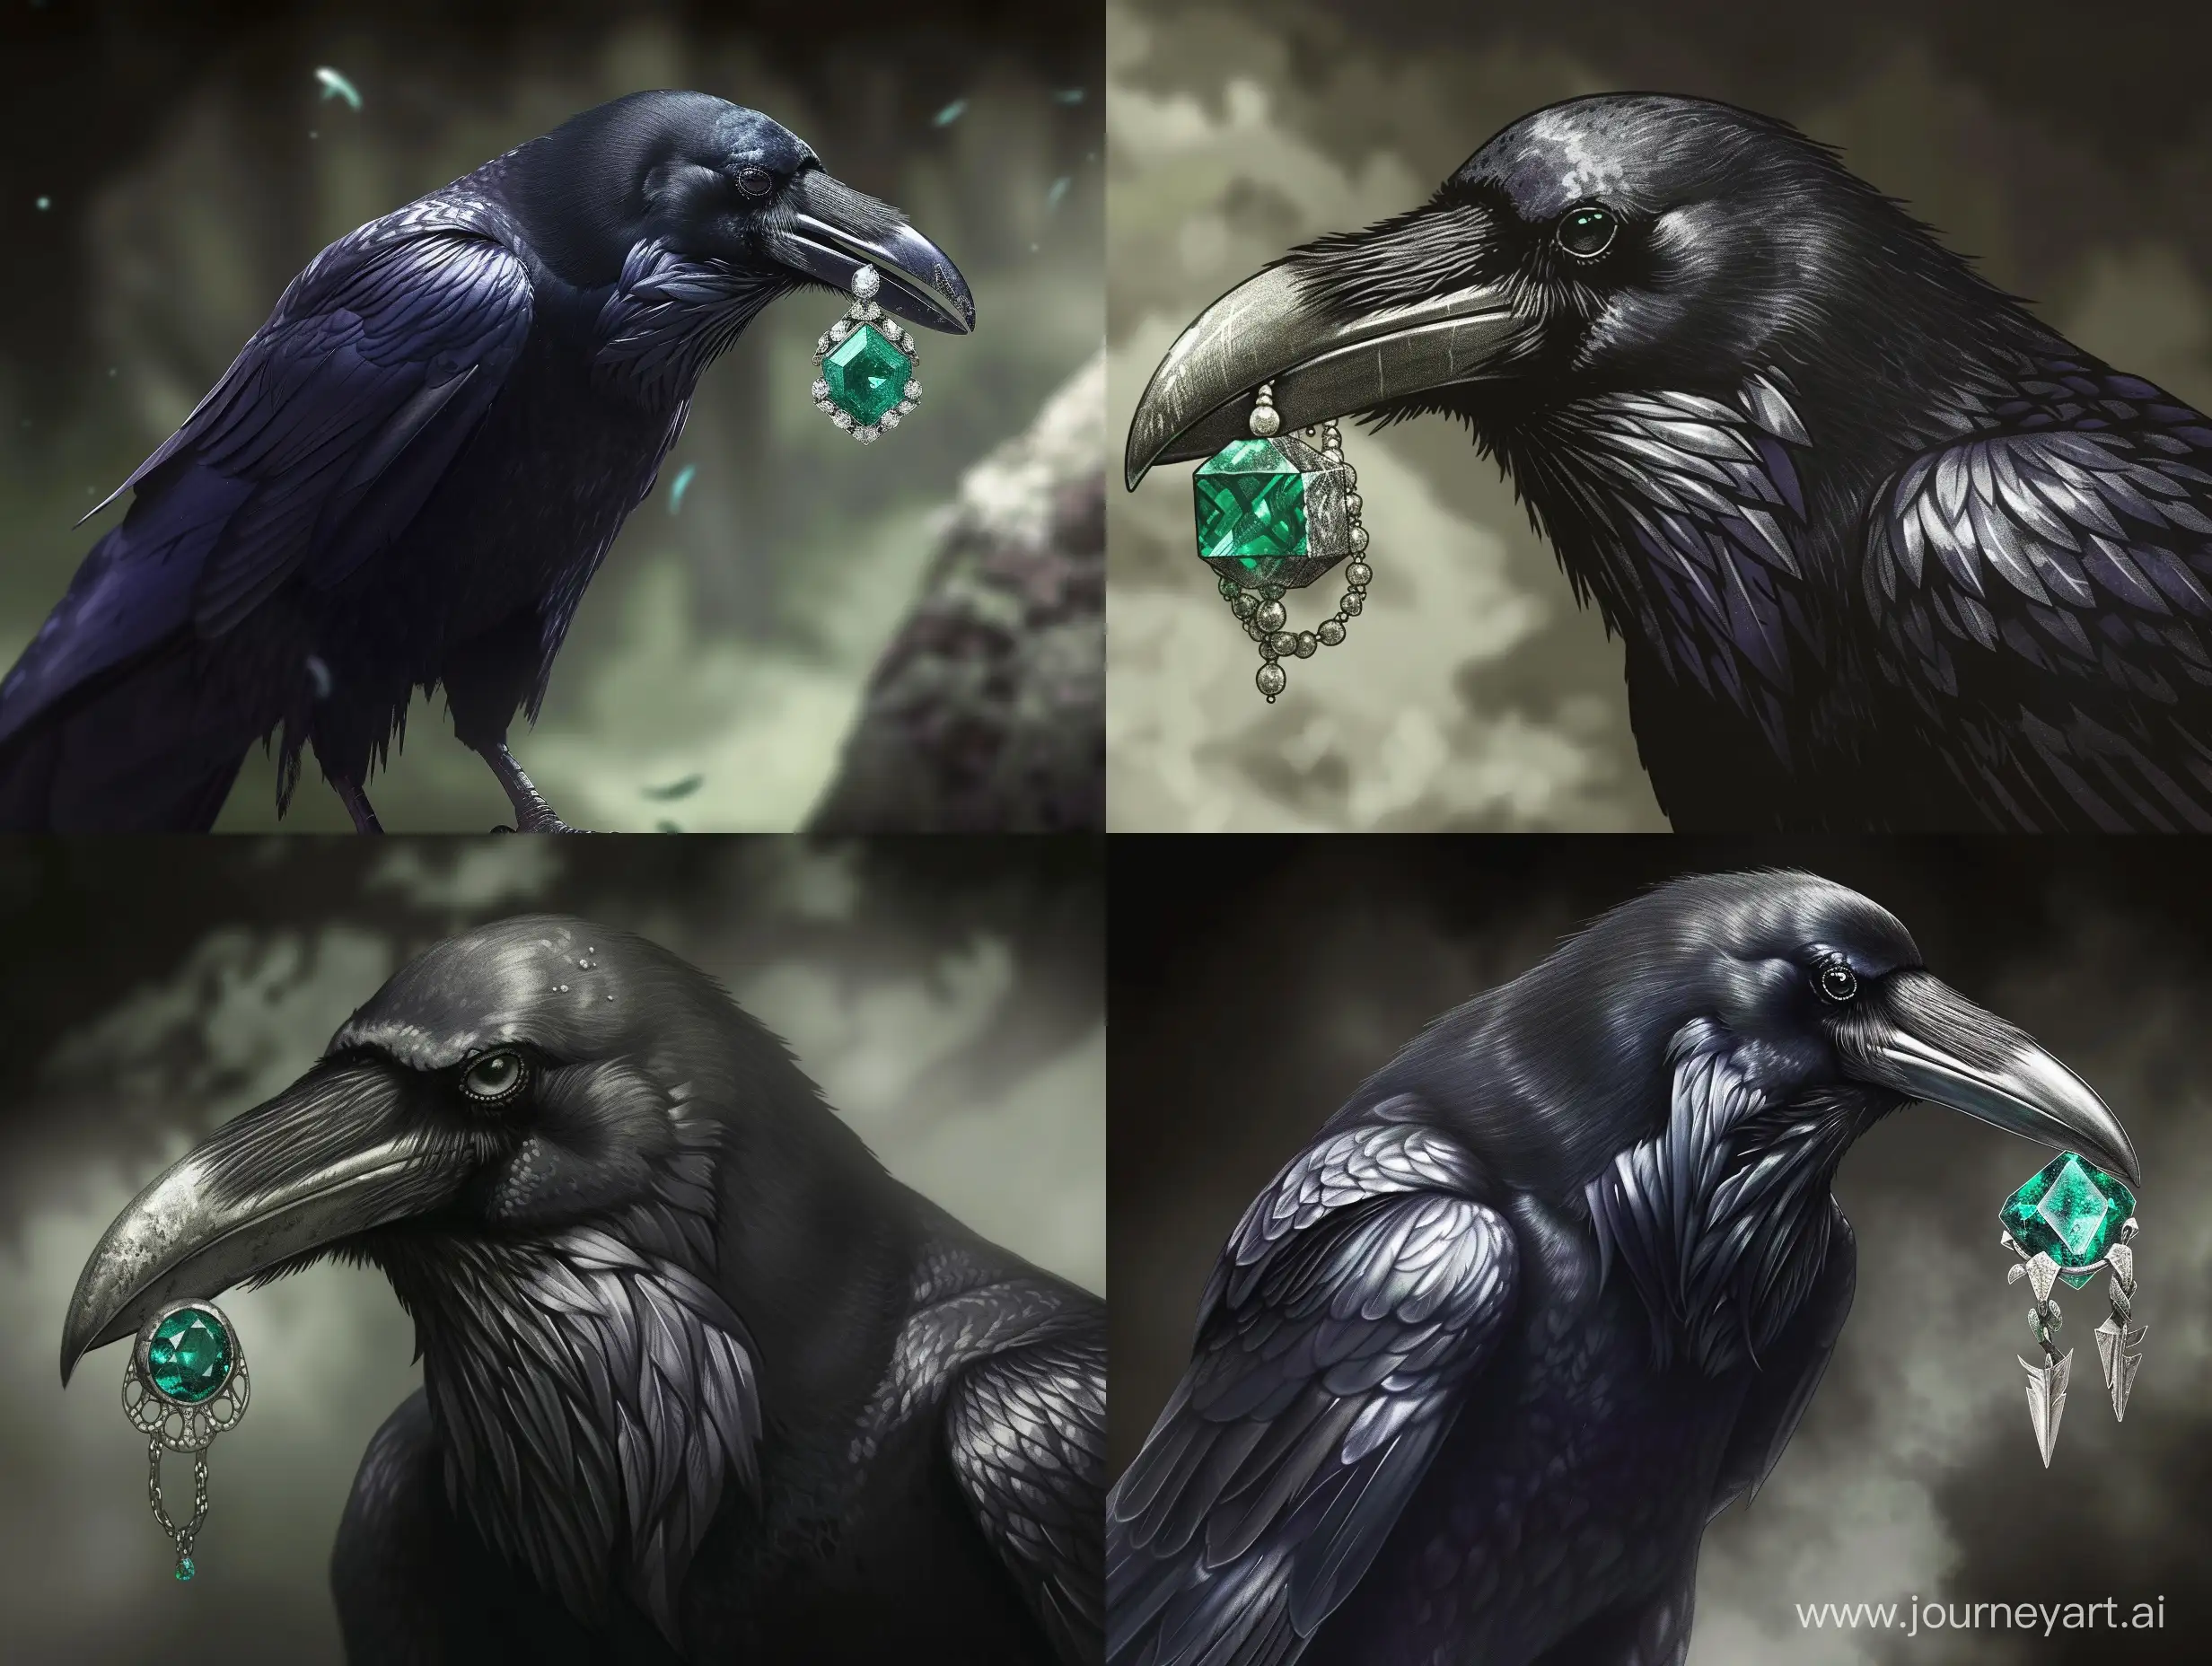 Mystical-Black-Raven-Holding-an-Emerald-in-Enchanting-Display